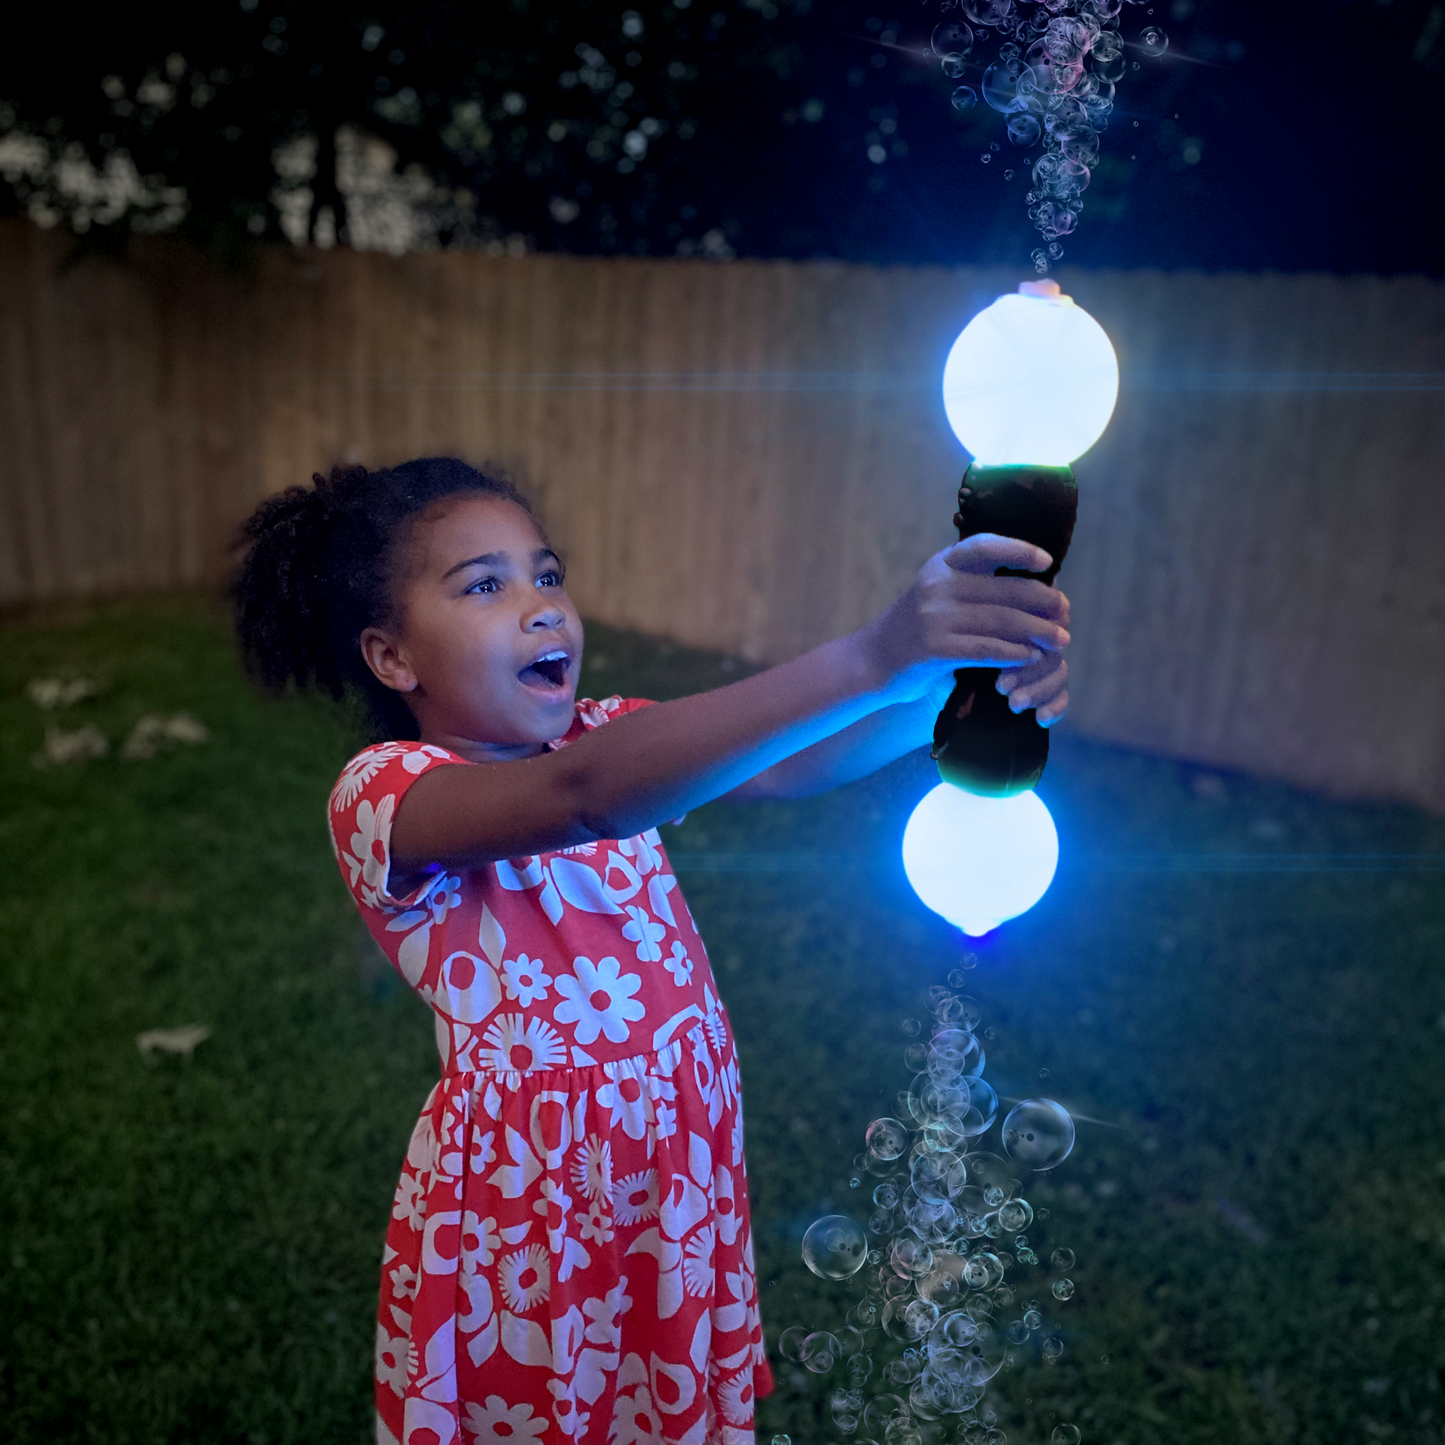 Light Up Twist Double Bubble Wand for Kids - 8 pack